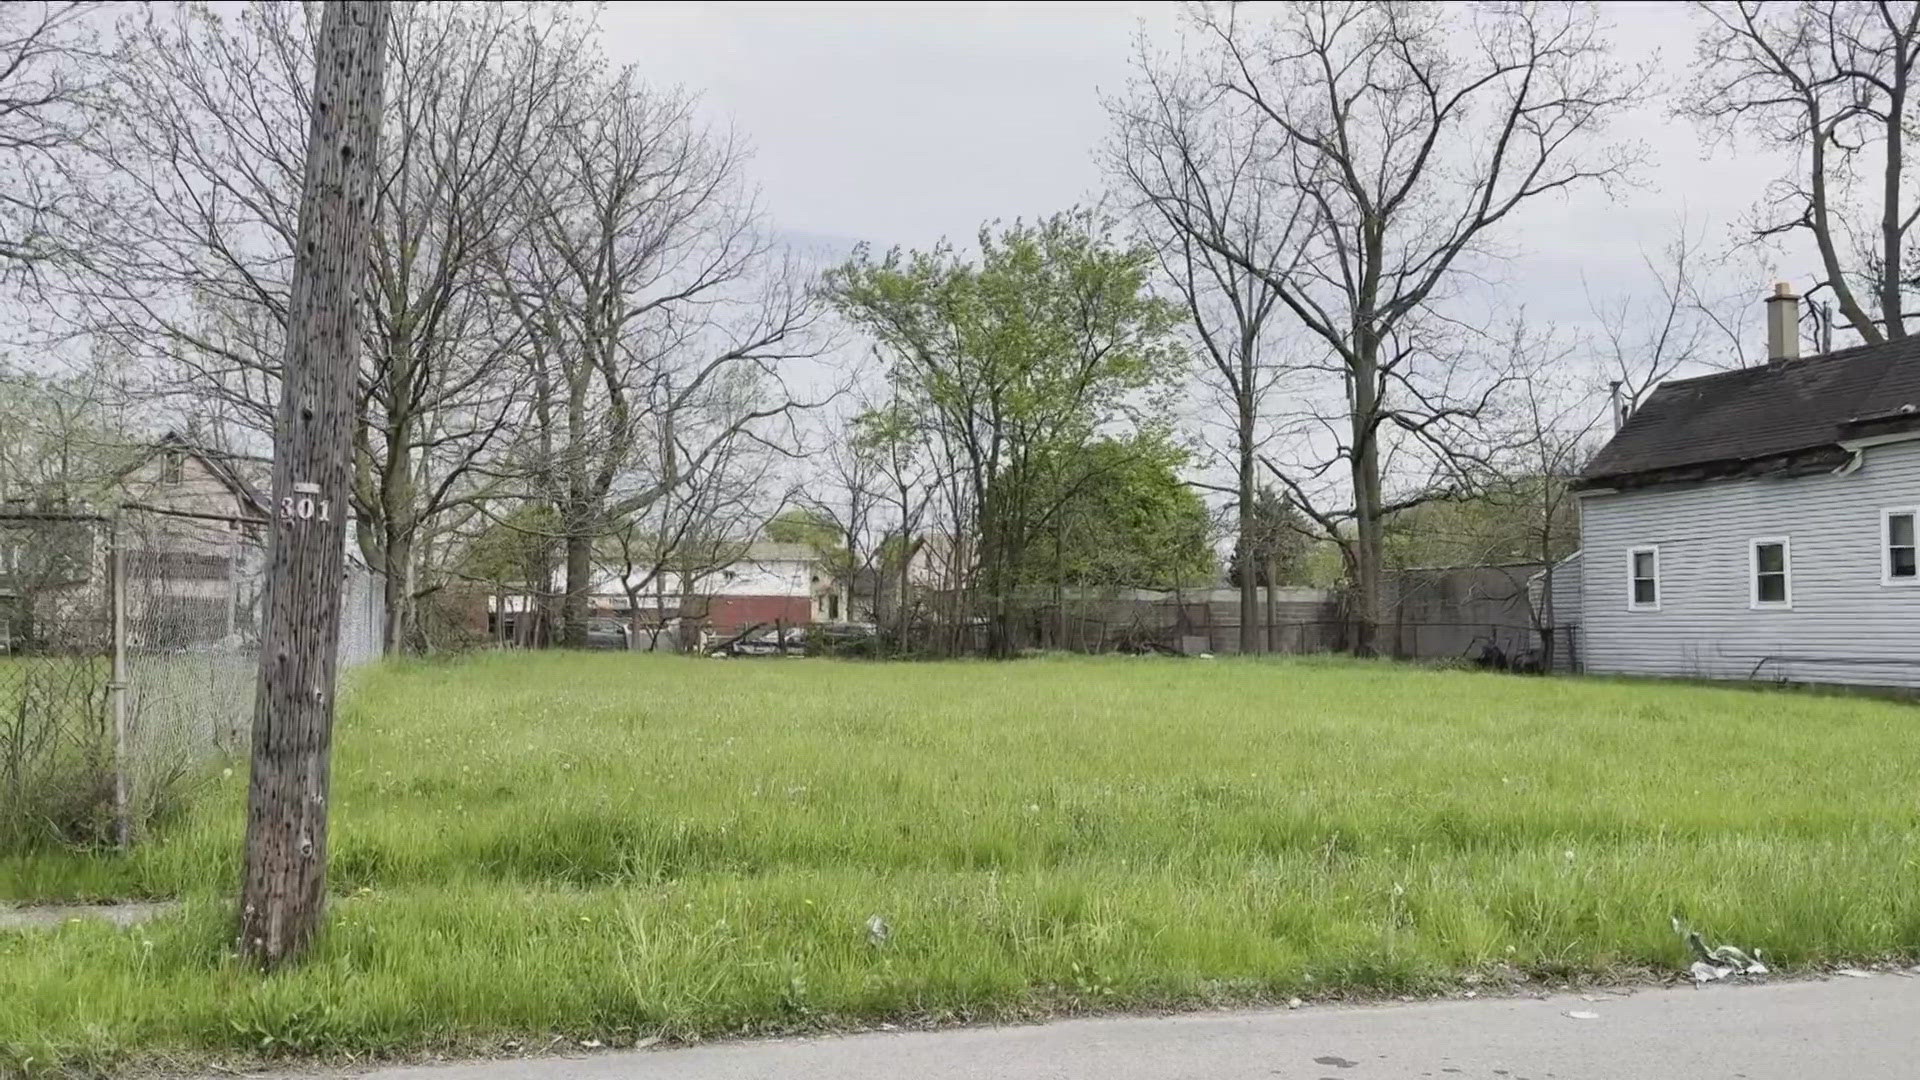 Buffalo hopes to build affordable housing on some of the 7000 lots it owns.